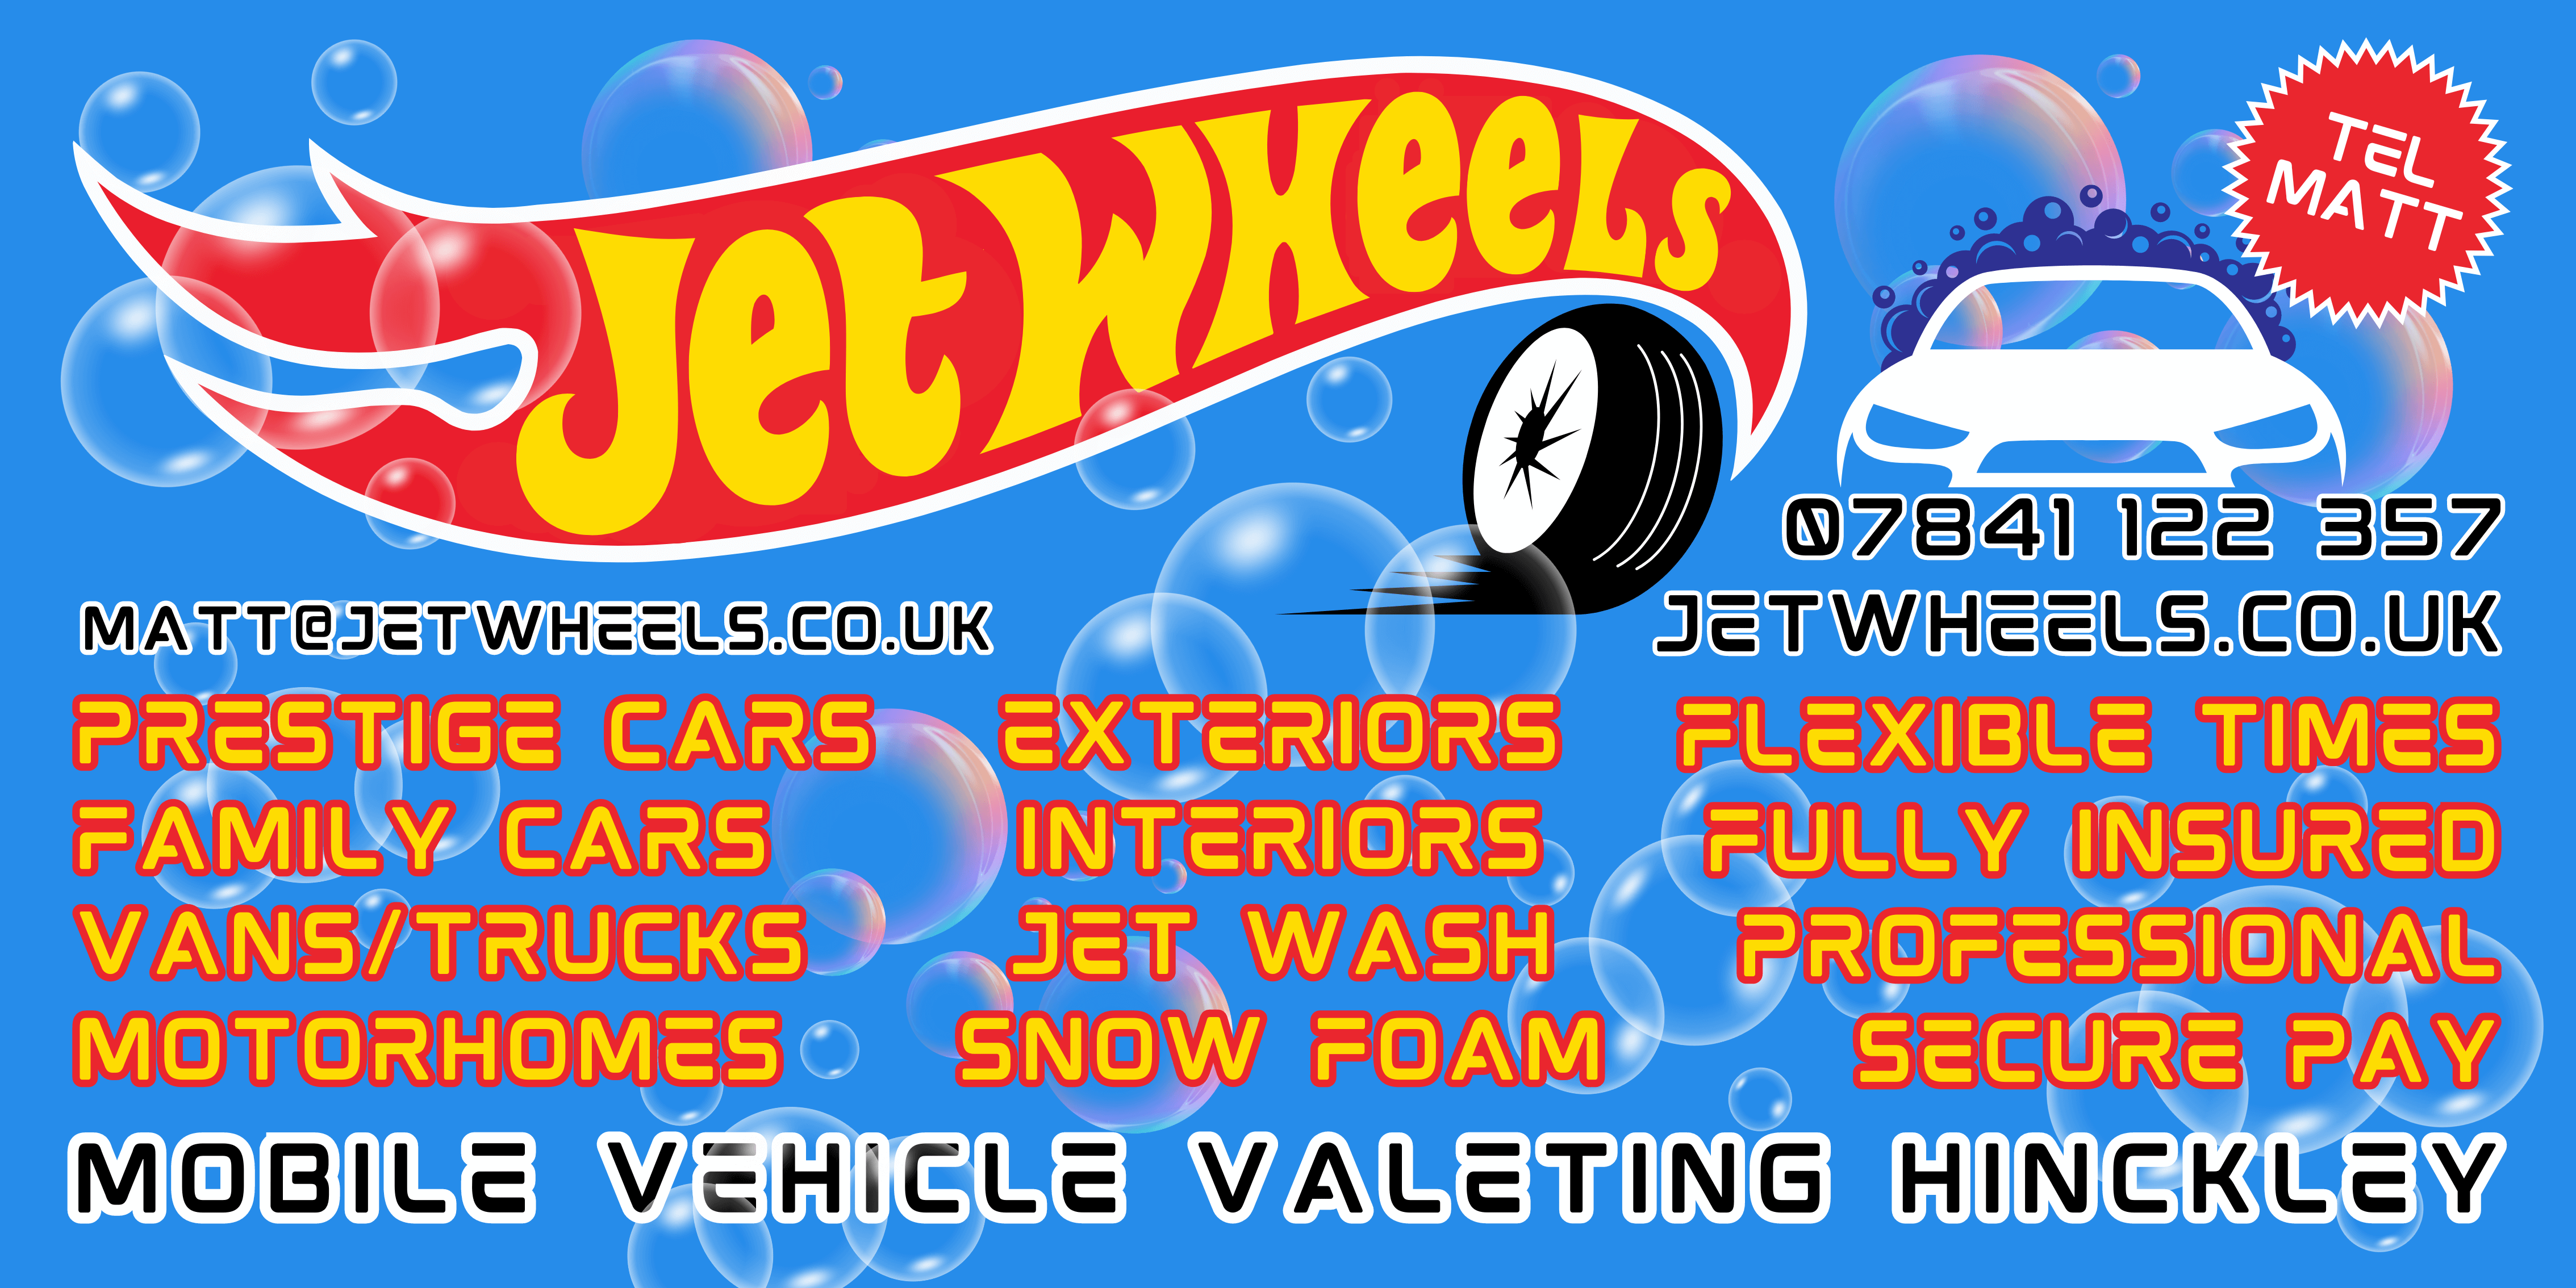 areas of service Jet Wheels mobile Valeting Hinckley